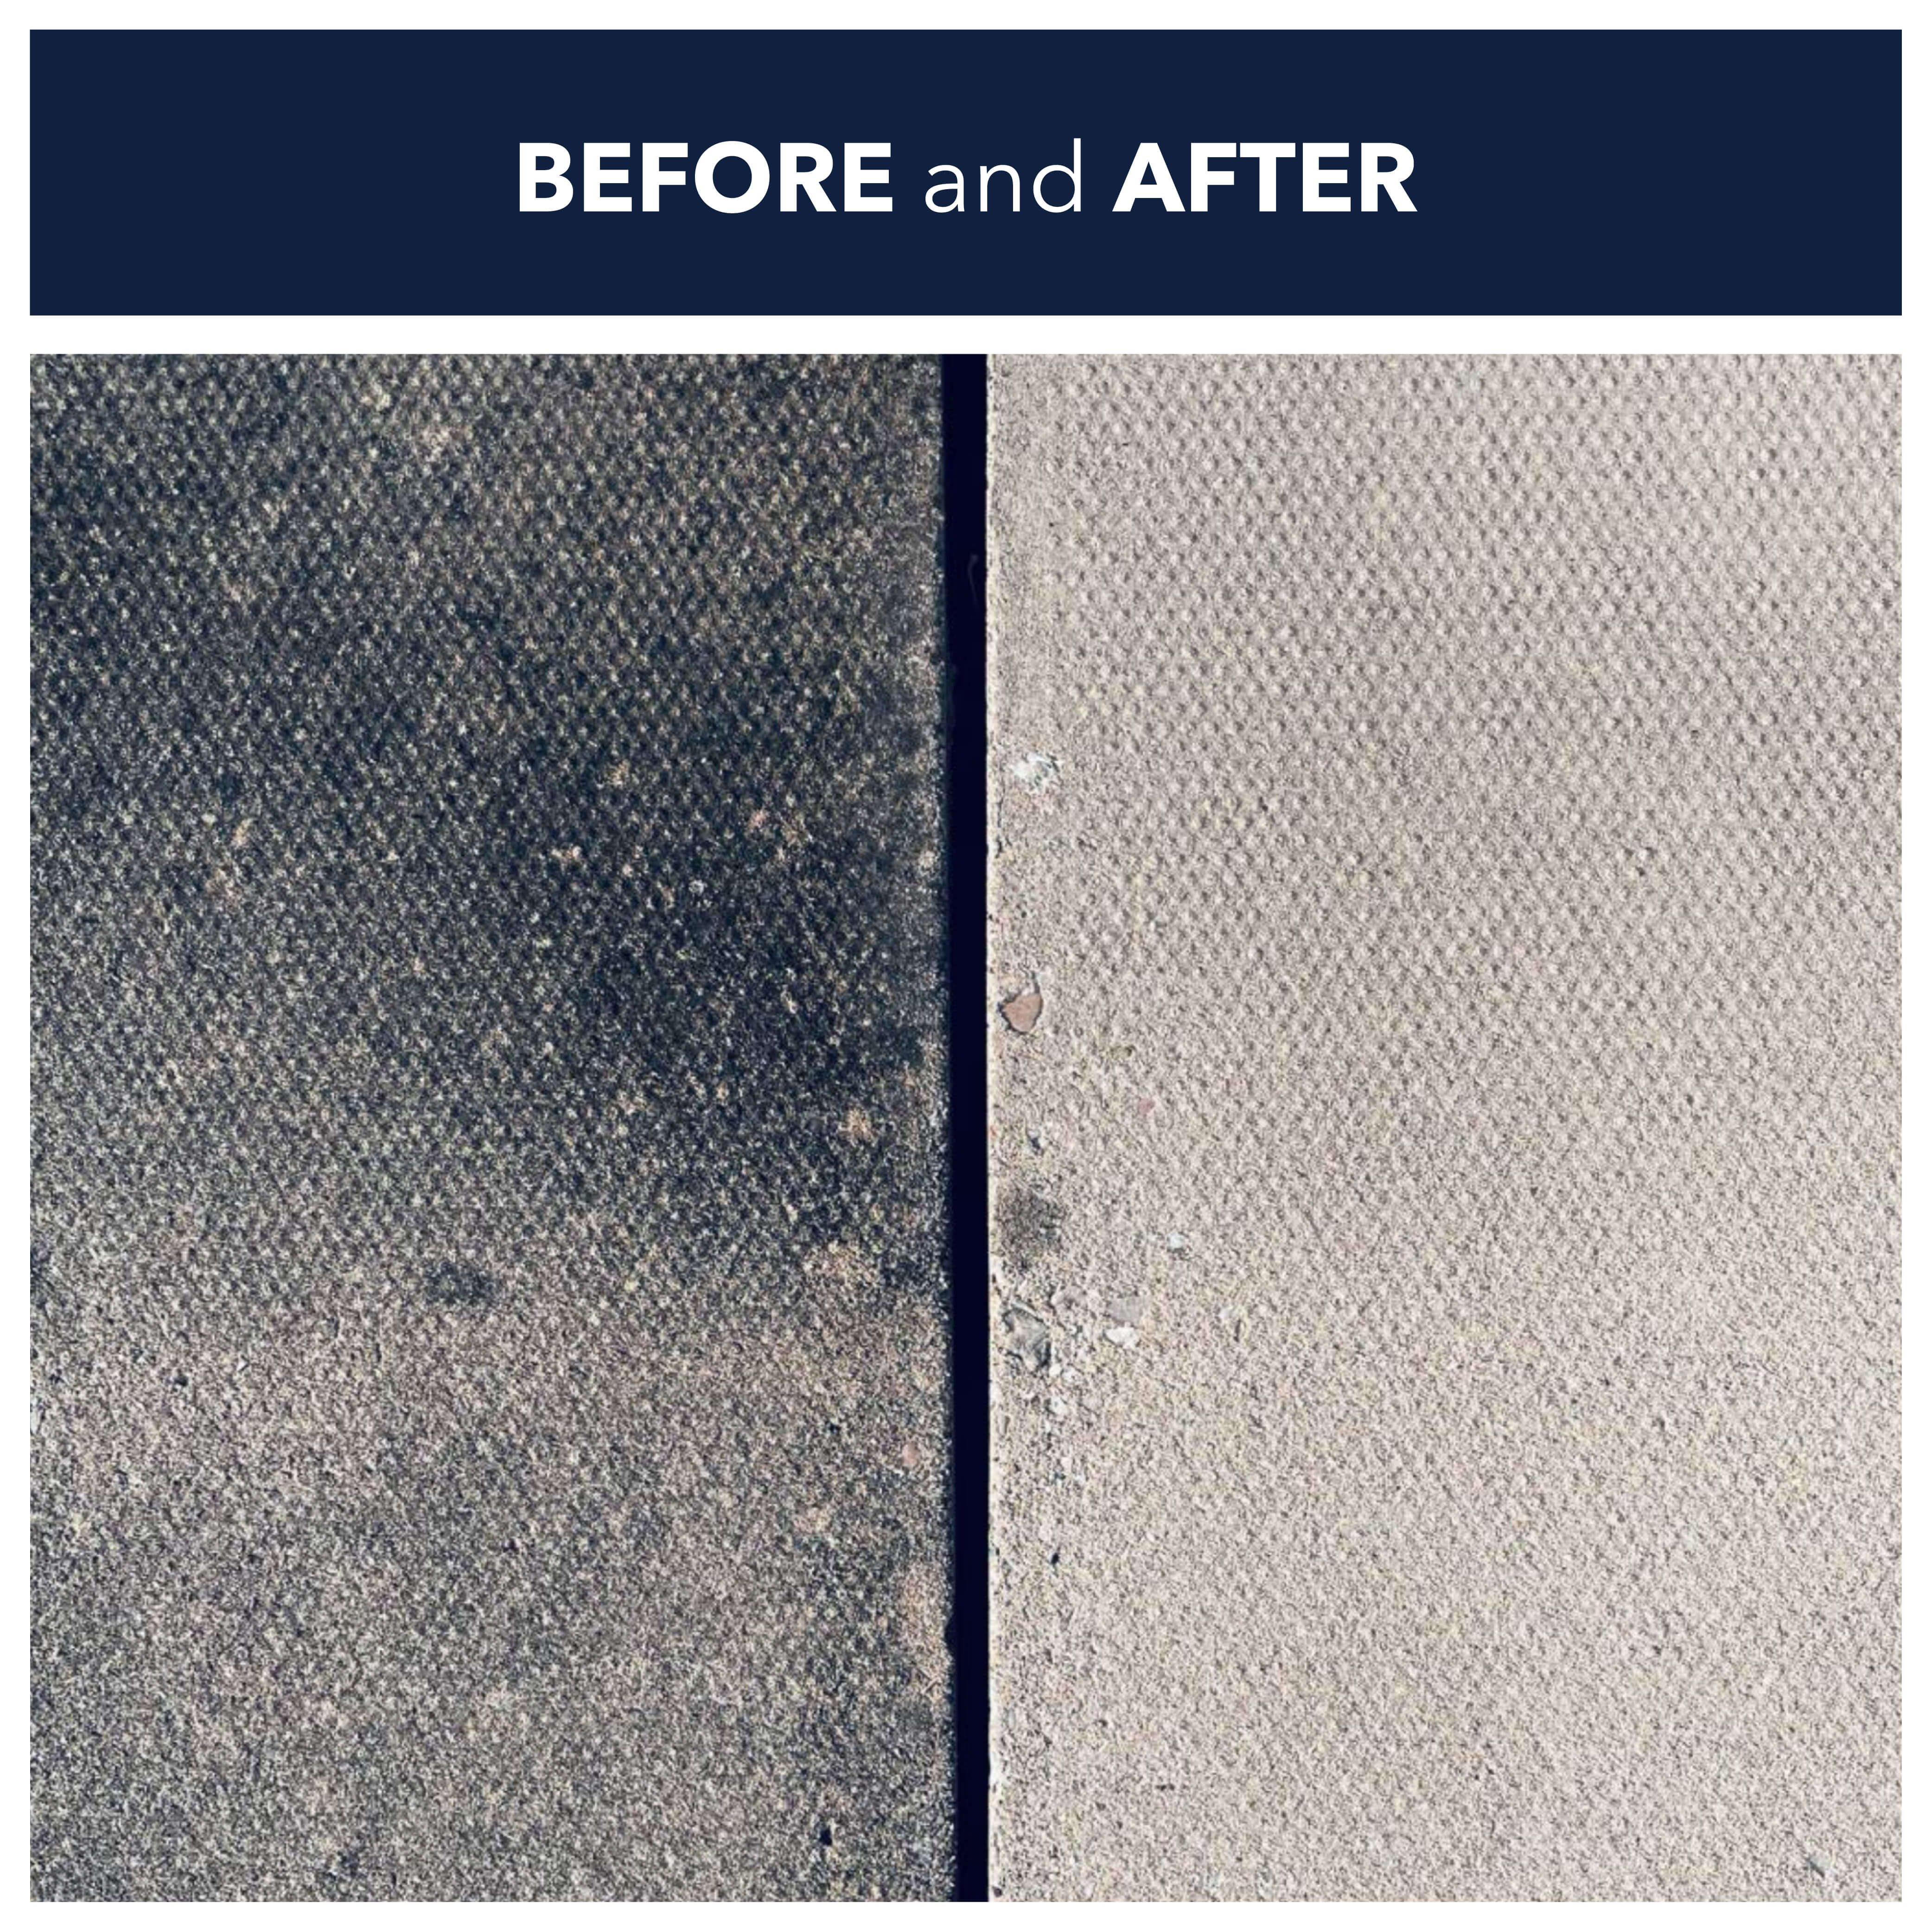 Before and after using Spear & Jackson Black Spot Remover